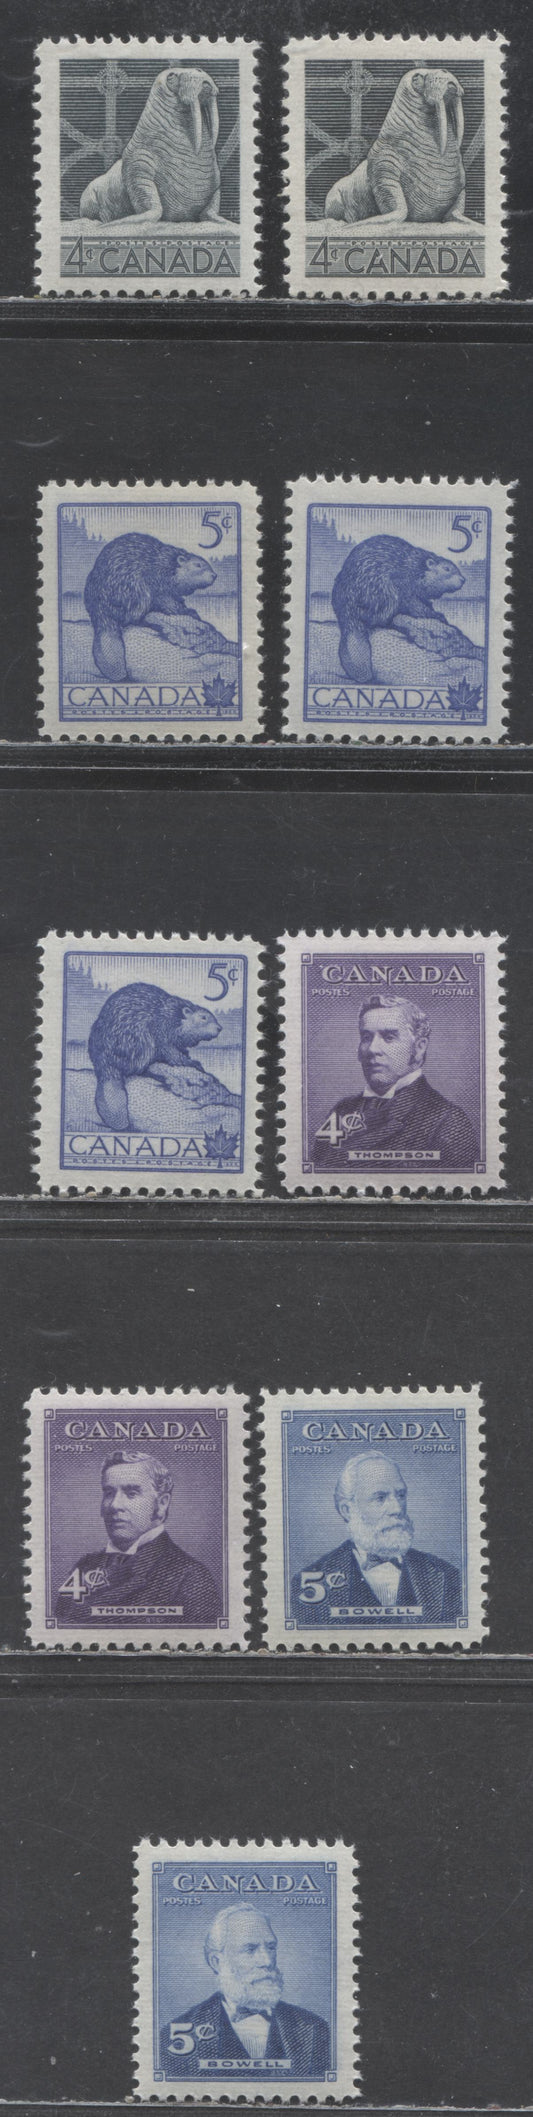 Lot 400 Canada #335-336, 349-350 4c-5c Walrus, Beaver, David Thompson, Mackenzie Bowell, 1954 Wildlife Week Issue - Prime Ministers Issue, 9 VFNH Singles, Smooth & Horiziontally Ribbed Papers, Different Shades Cream & Yellowish Satin & Semi-Gloss Gum